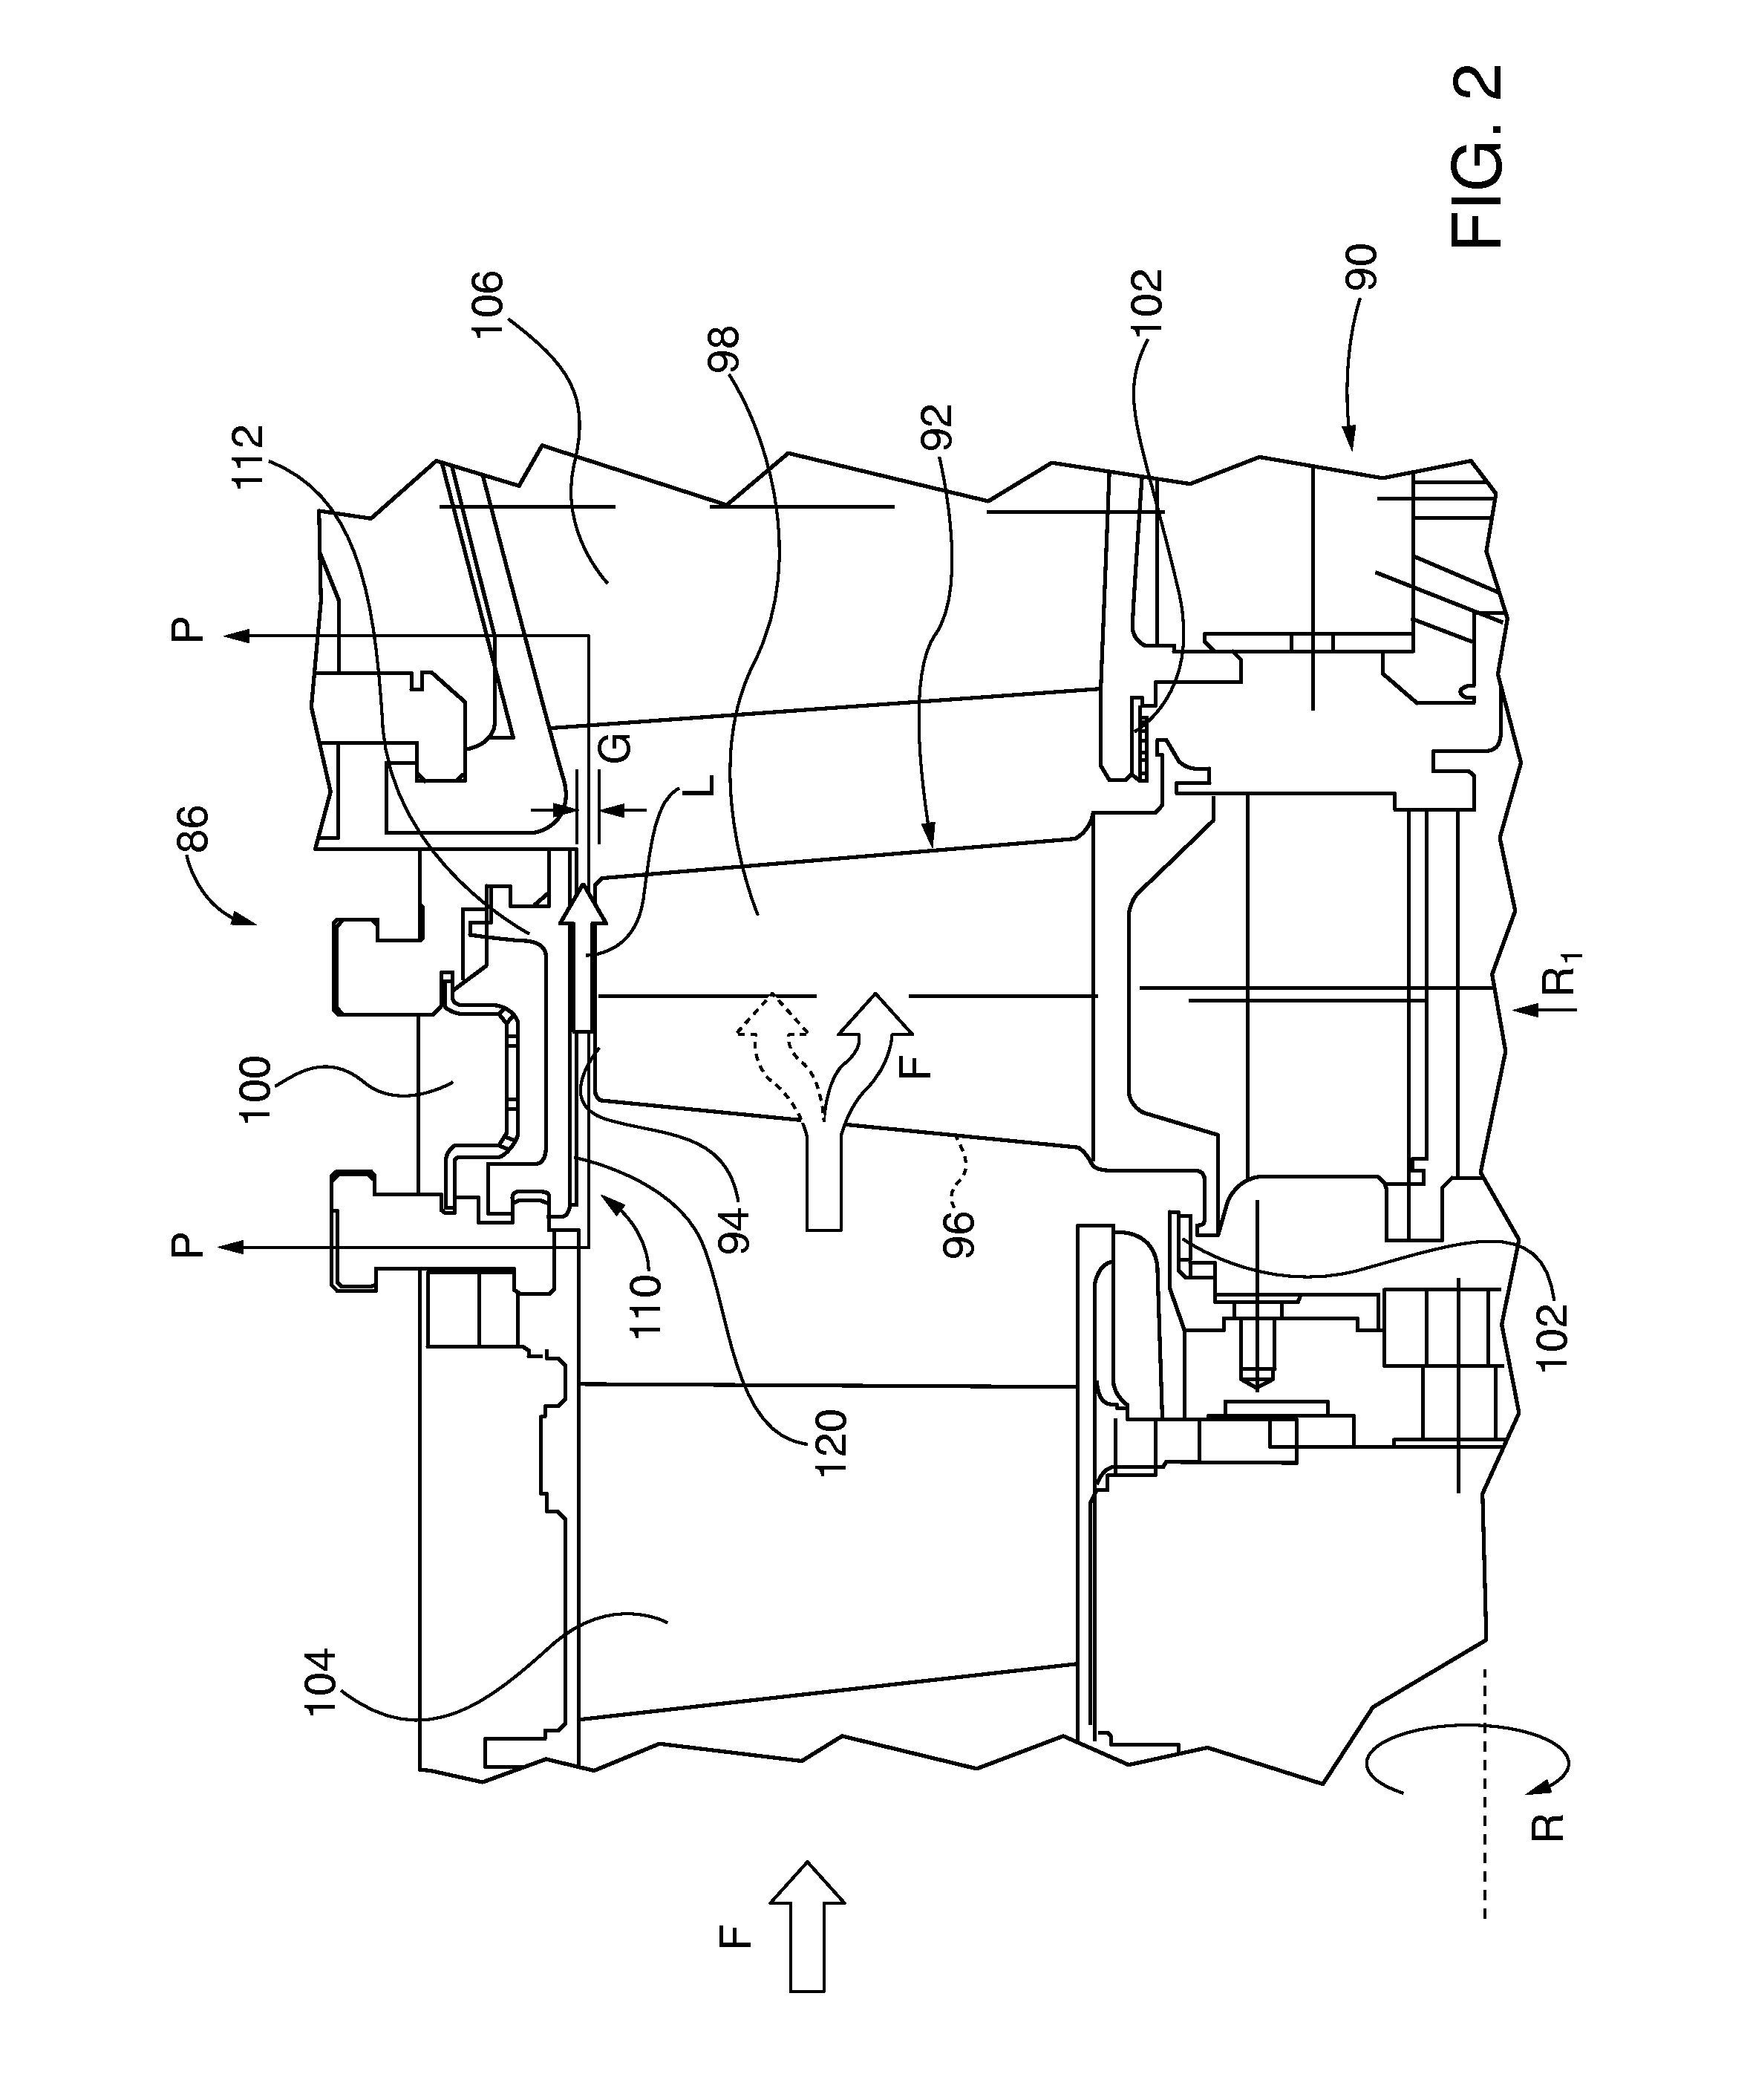 Turbine abradable layer with nested loop groove pattern